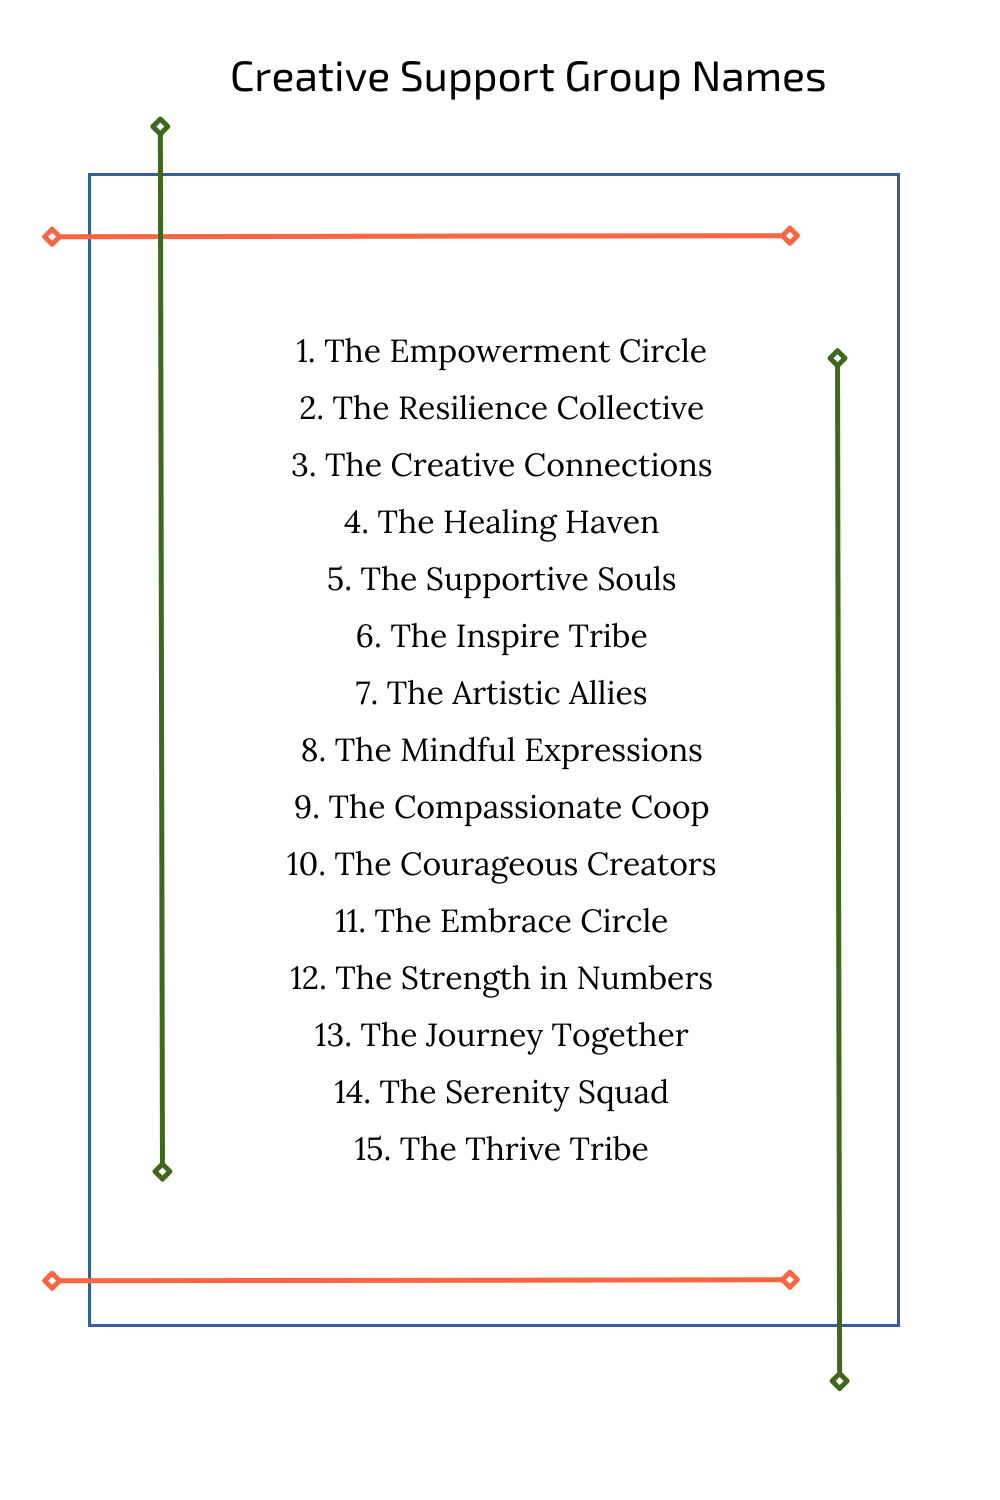 Creative Support Group Names